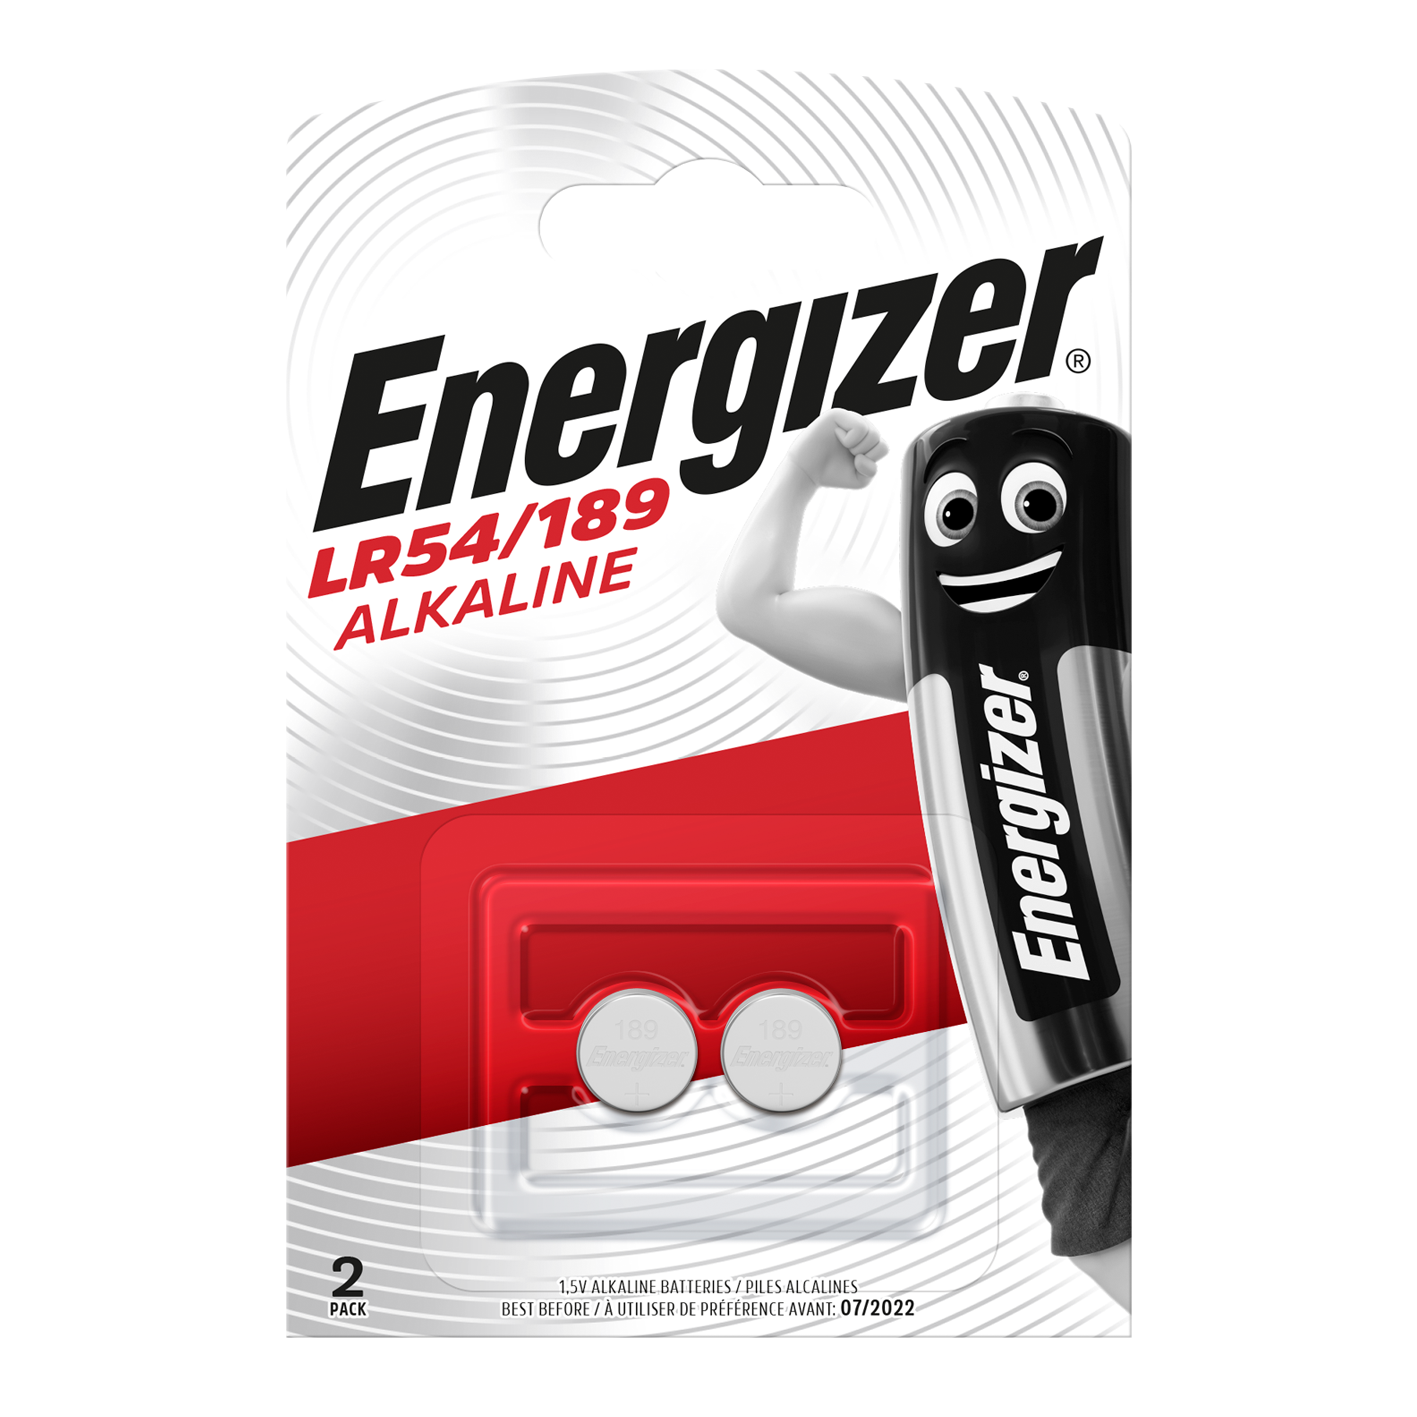 Energizer LR54/189 Alkaline Coin Cell, Pack of 2